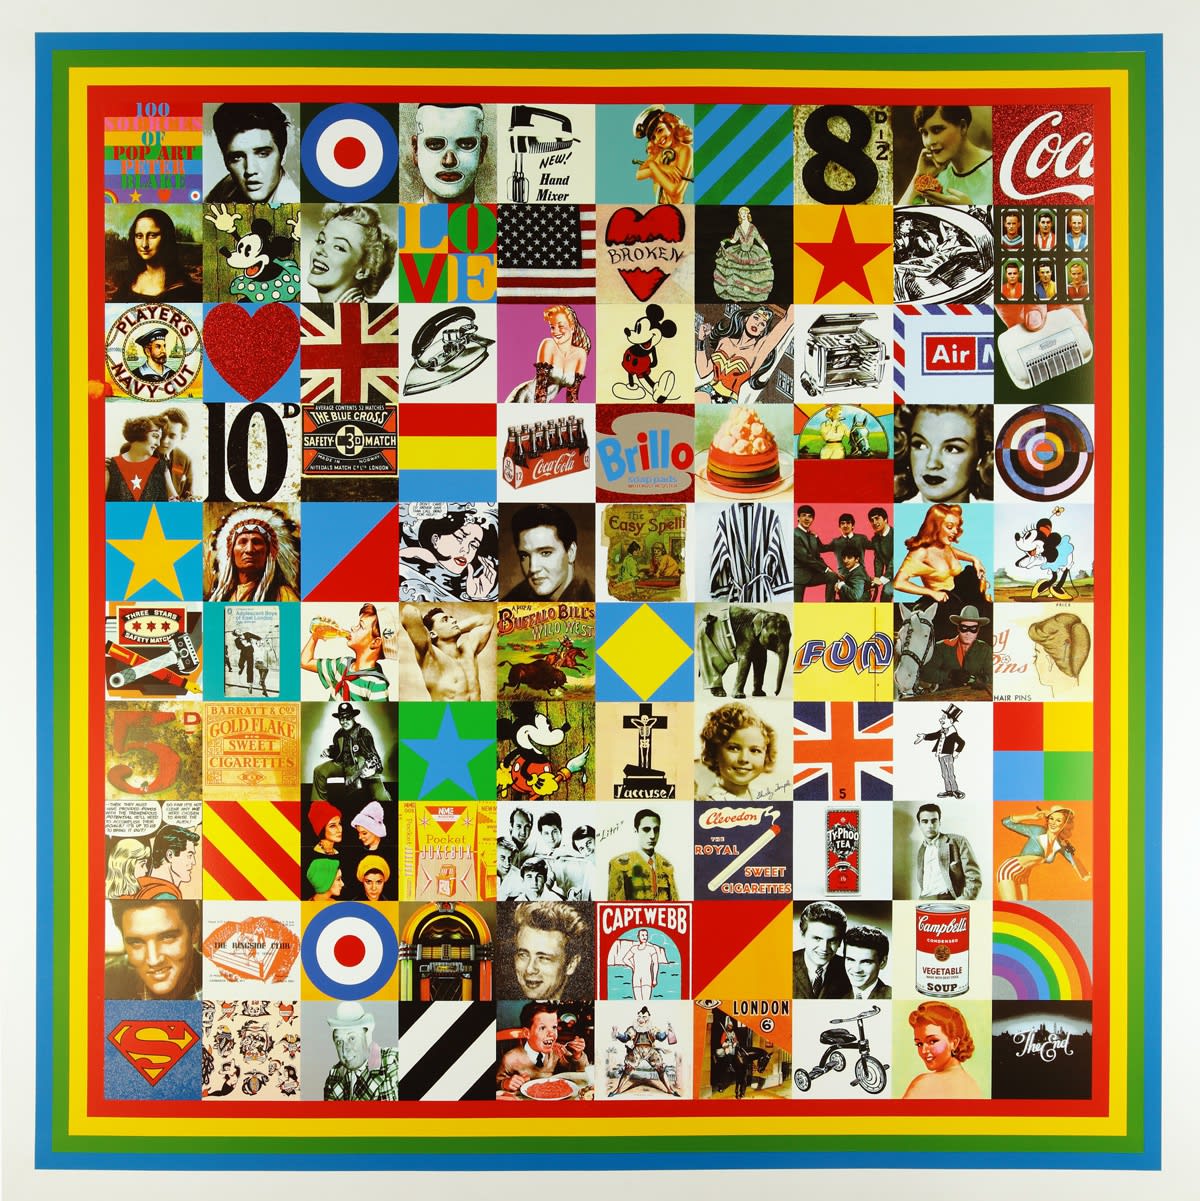 LIMITED EDITIONS BY PETER BLAKE: Published by CCA Galleries and printed at Coriander Studios